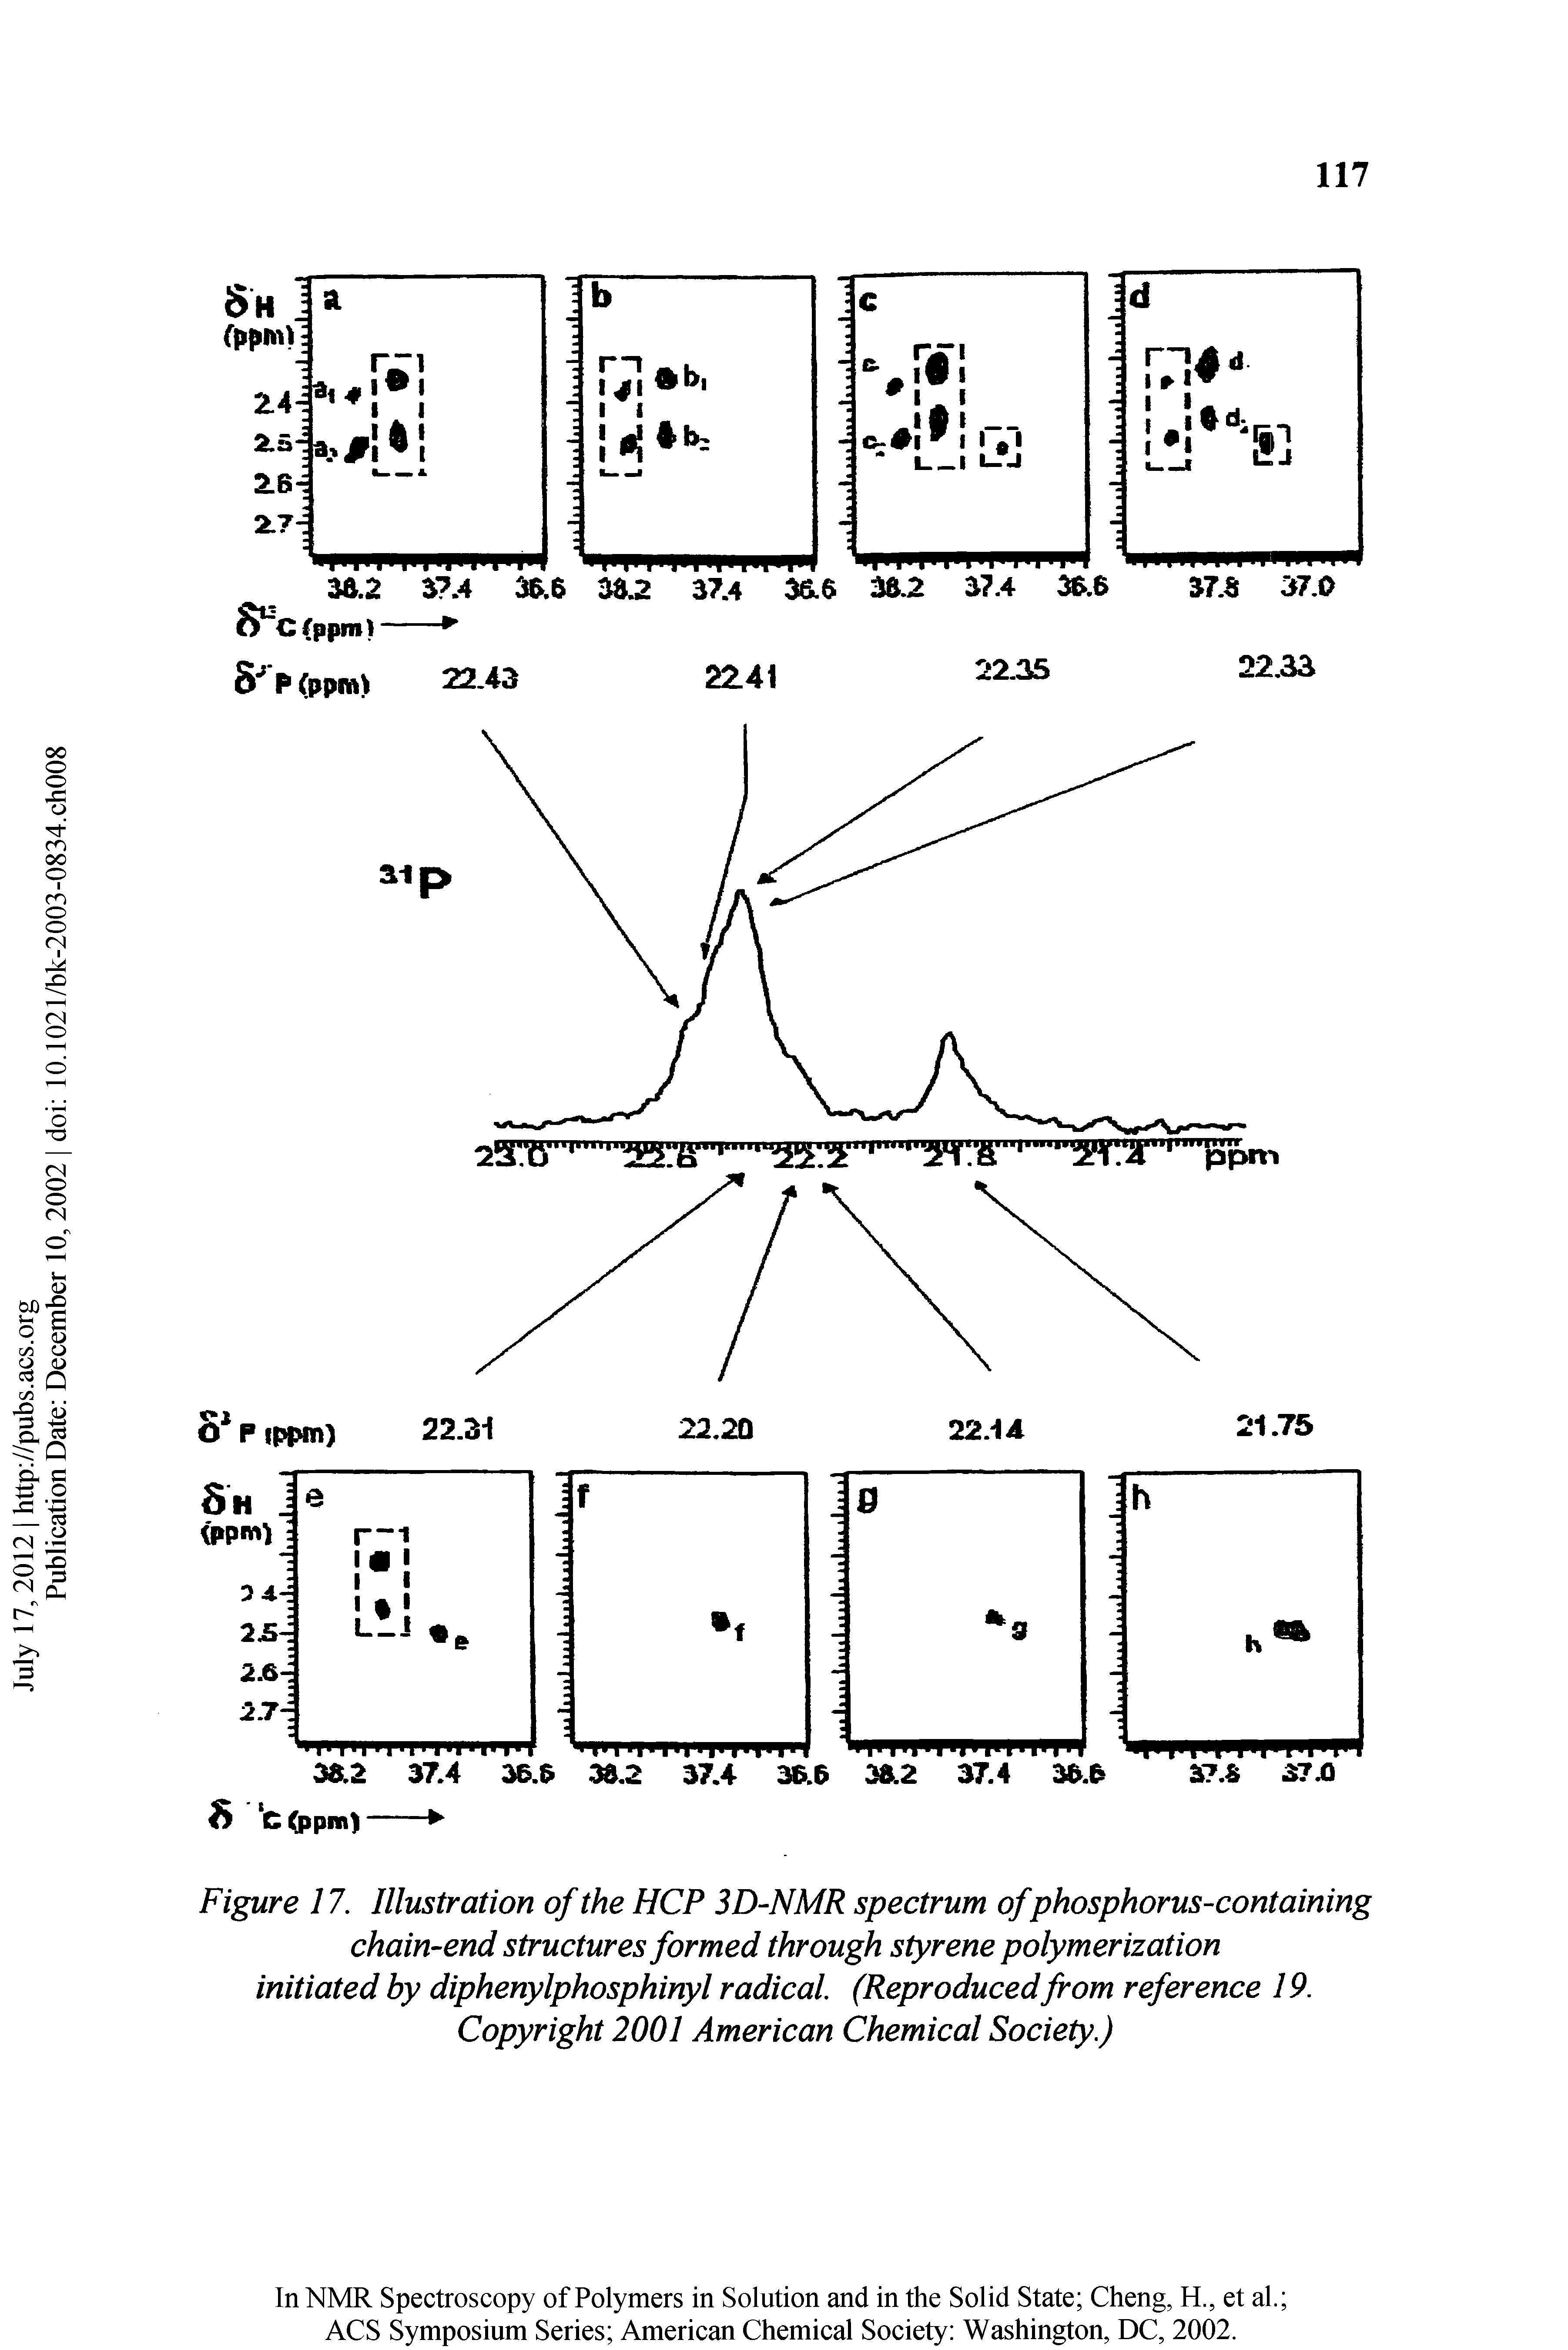 Figure 17, Illustration of the HCP 3D-NMR spectrum of phosphorus-containing chain-end structures formed through styrene polymerization initiated by diphenylphosphinyl radical (Reproducedfrom reference 19. Copyright 2001 American Chemical Society.)...